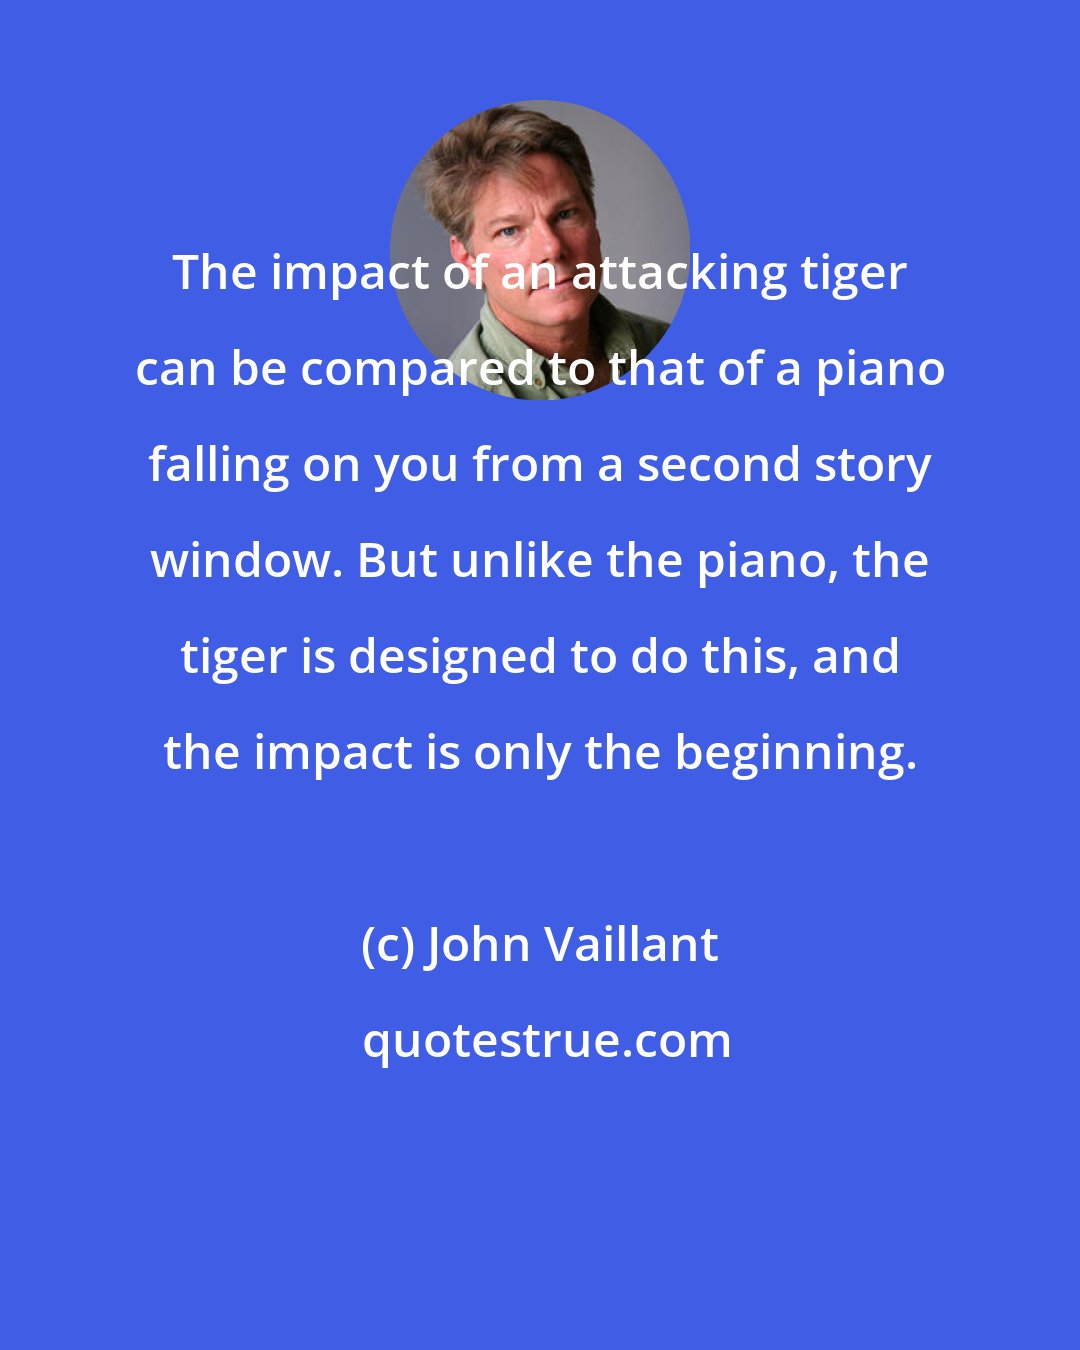 John Vaillant: The impact of an attacking tiger can be compared to that of a piano falling on you from a second story window. But unlike the piano, the tiger is designed to do this, and the impact is only the beginning.